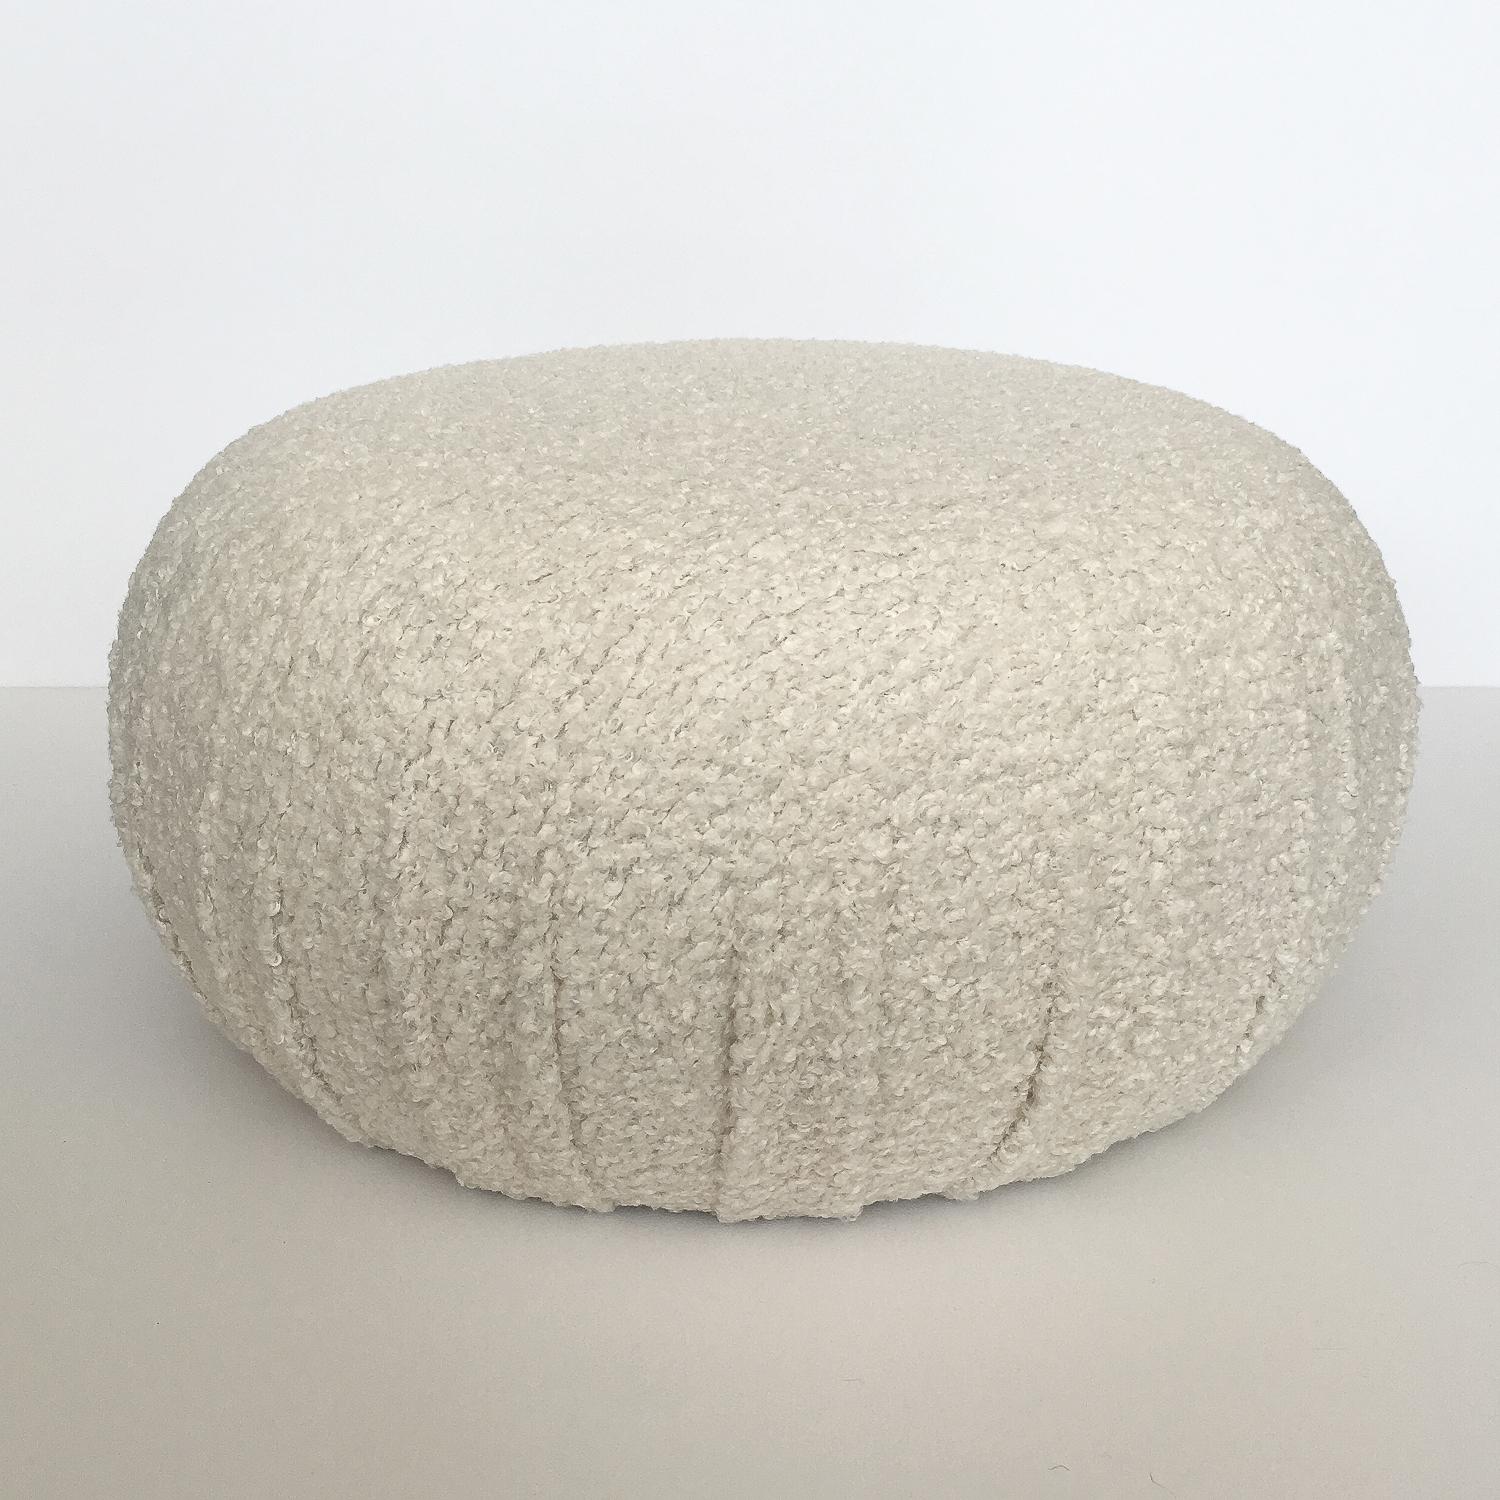 Pair of fully upholstered round souffle pouf ottomans. Newly constructed and upholstered in an off-white natural faux shearling / sheepskin with soft, curly, nubby texture. Excellent option for additional seating or foot stools. Fabric swatches are